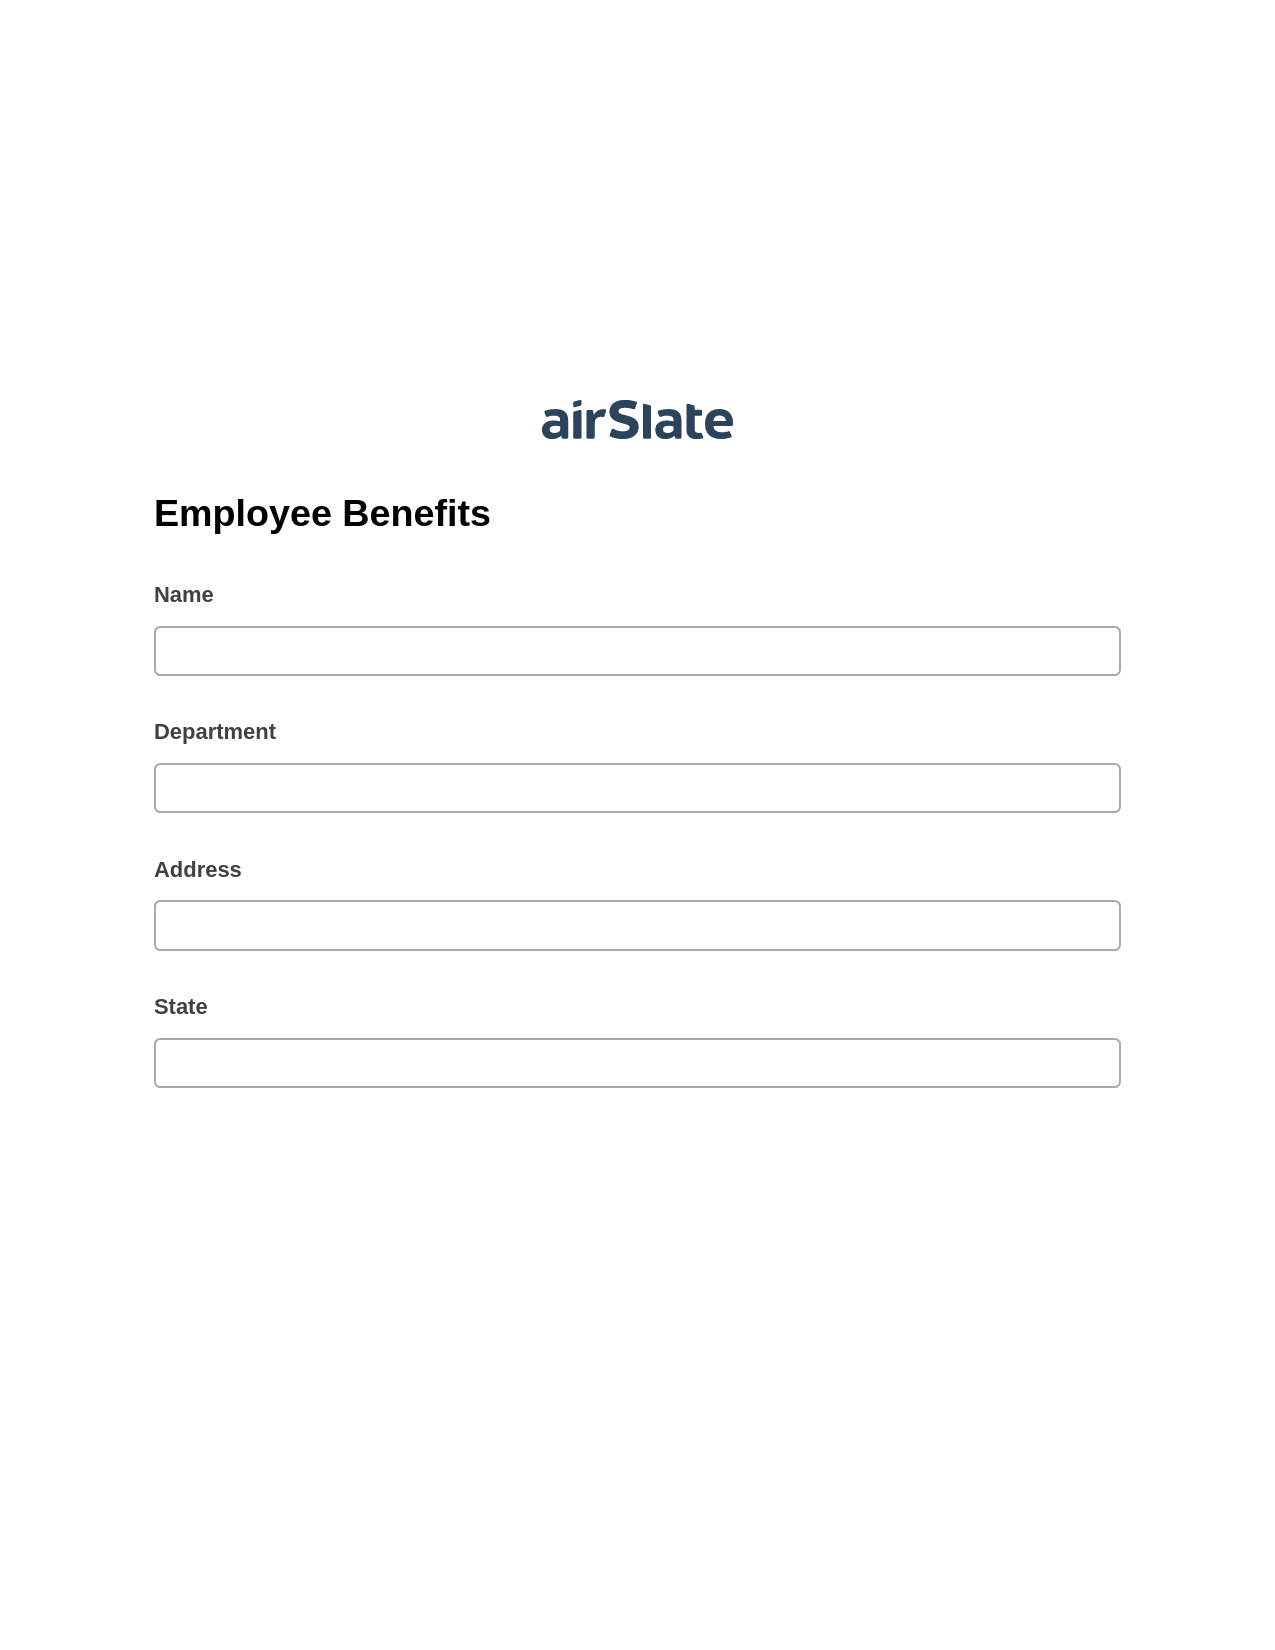 Multirole Employee Benefits Pre-fill from CSV File Bot, Create NetSuite Records Bot, Text Message Notification Postfinish Bot